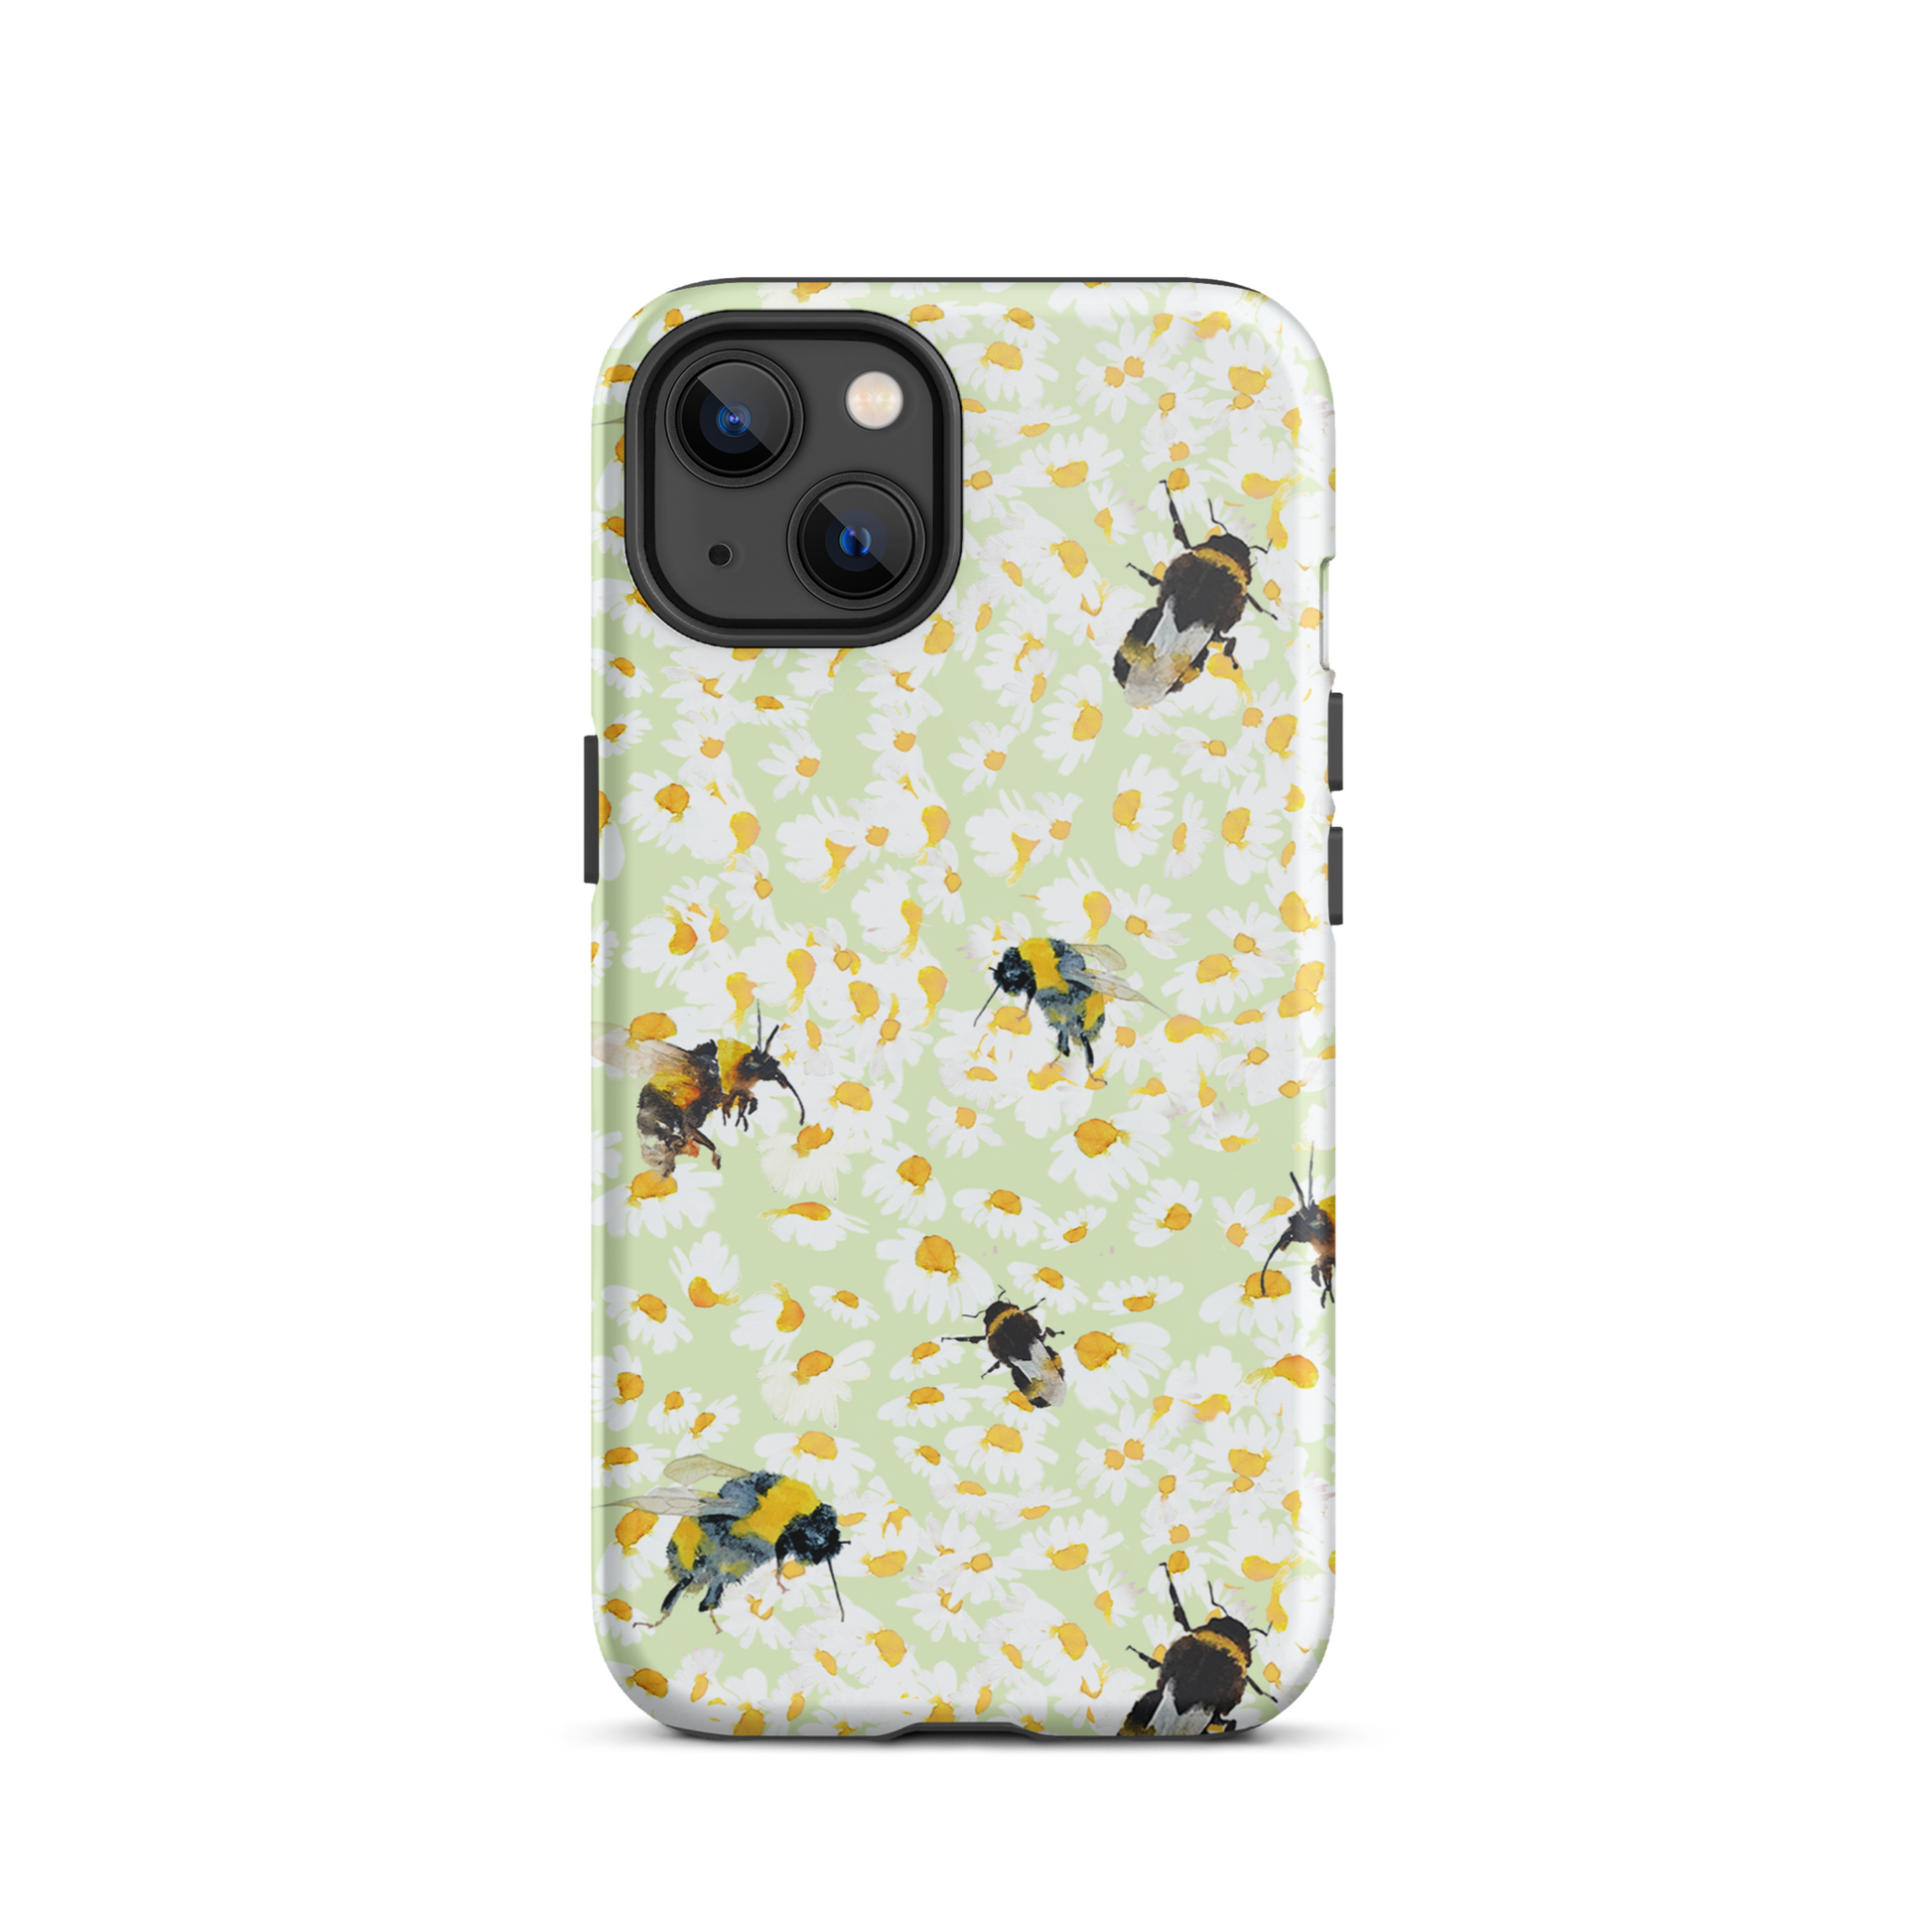 Fresh Bee and Daisies Mobile Phone by Artist Annie Grant